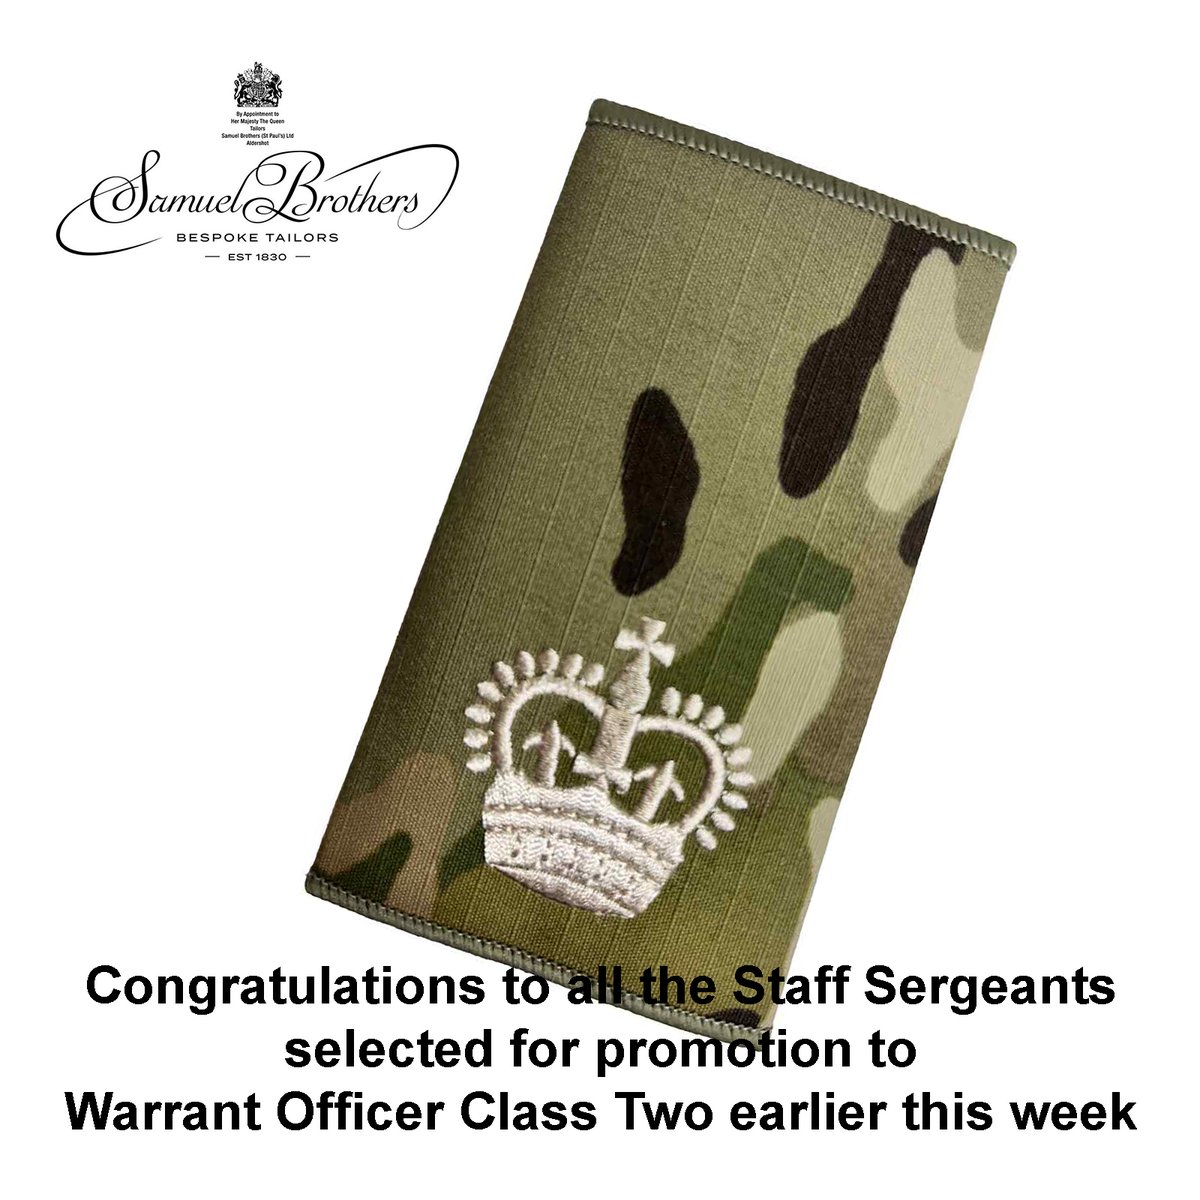 Congratulations to all the Staff Sergeants selected for promotion to Warrant Officer Class Two this week. A fantastic achievement.

#promotion #Army #BritishArmy #WarrantOfficer #soldier #career #uniform #tailors